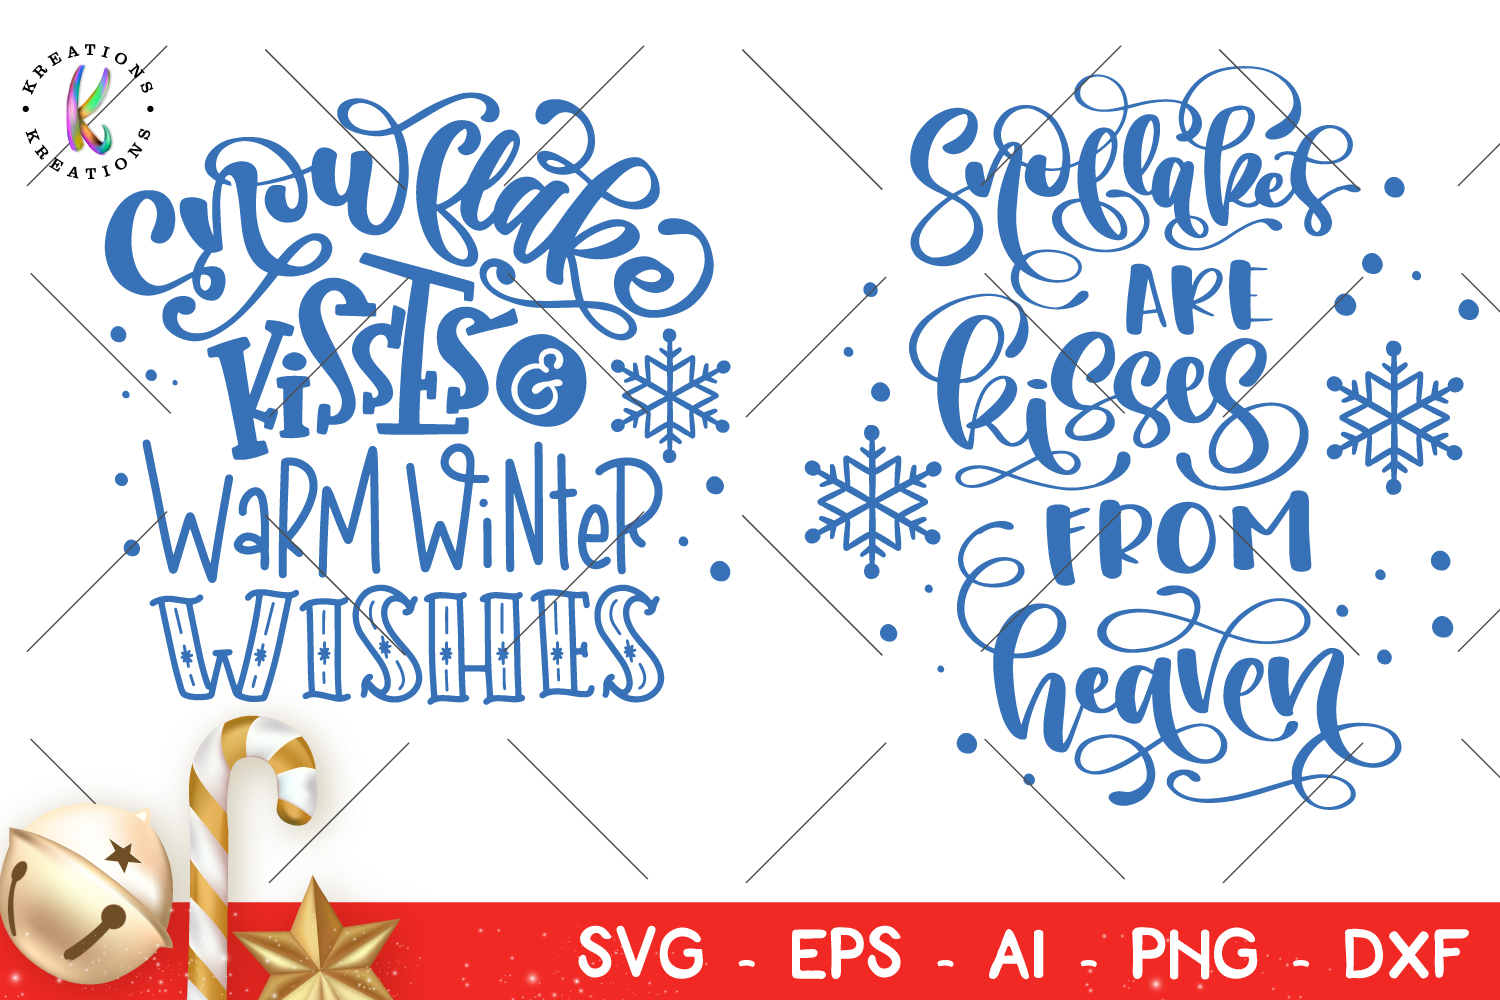 Download Snowflakes are kisses from heaven svg Christmas quotes ...